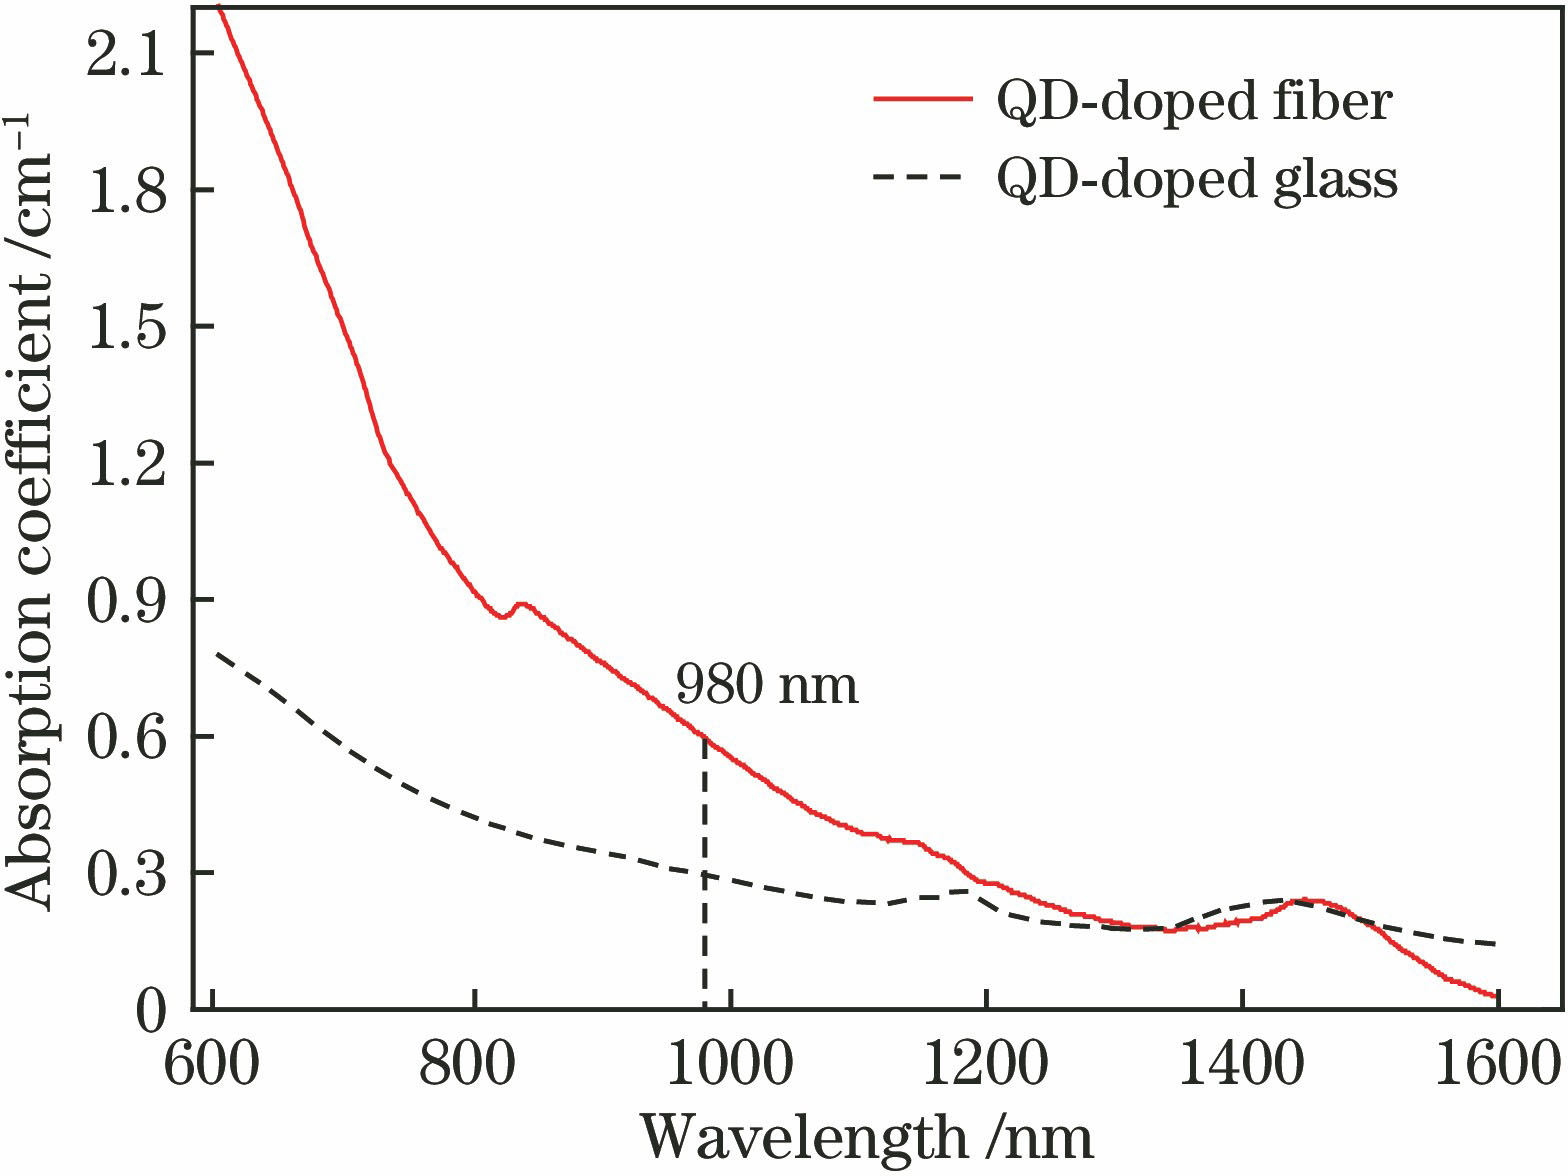 Absorption spectra of PbSe QD-doped glass and fiber and wavelength-dependent absorption coefficient